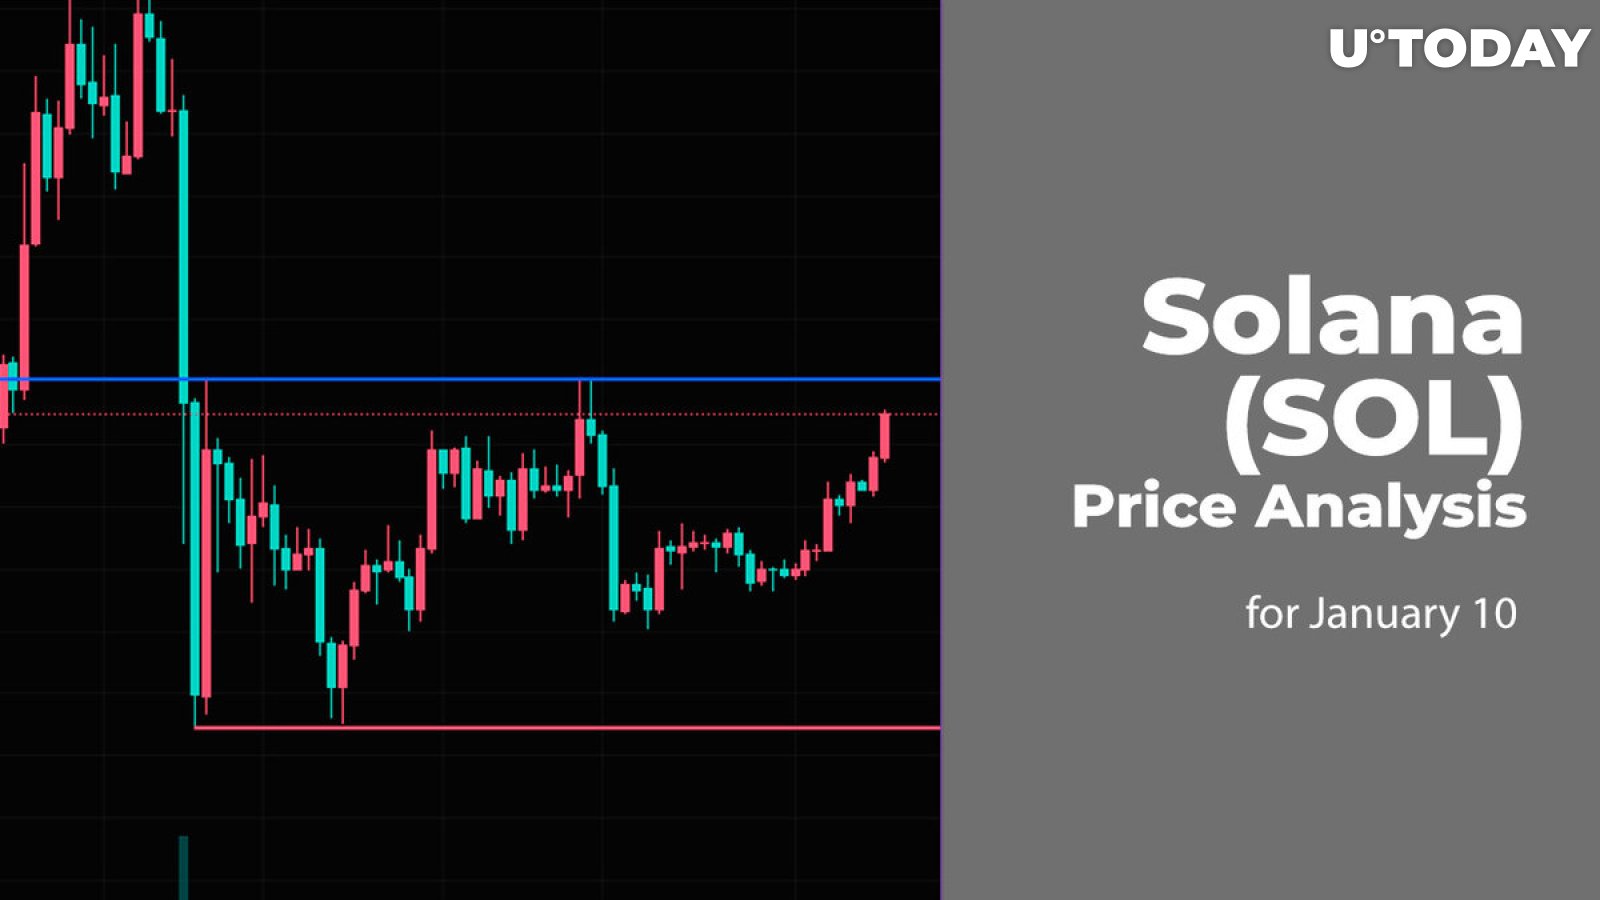 Solana (SOL) Price Analysis for January 10